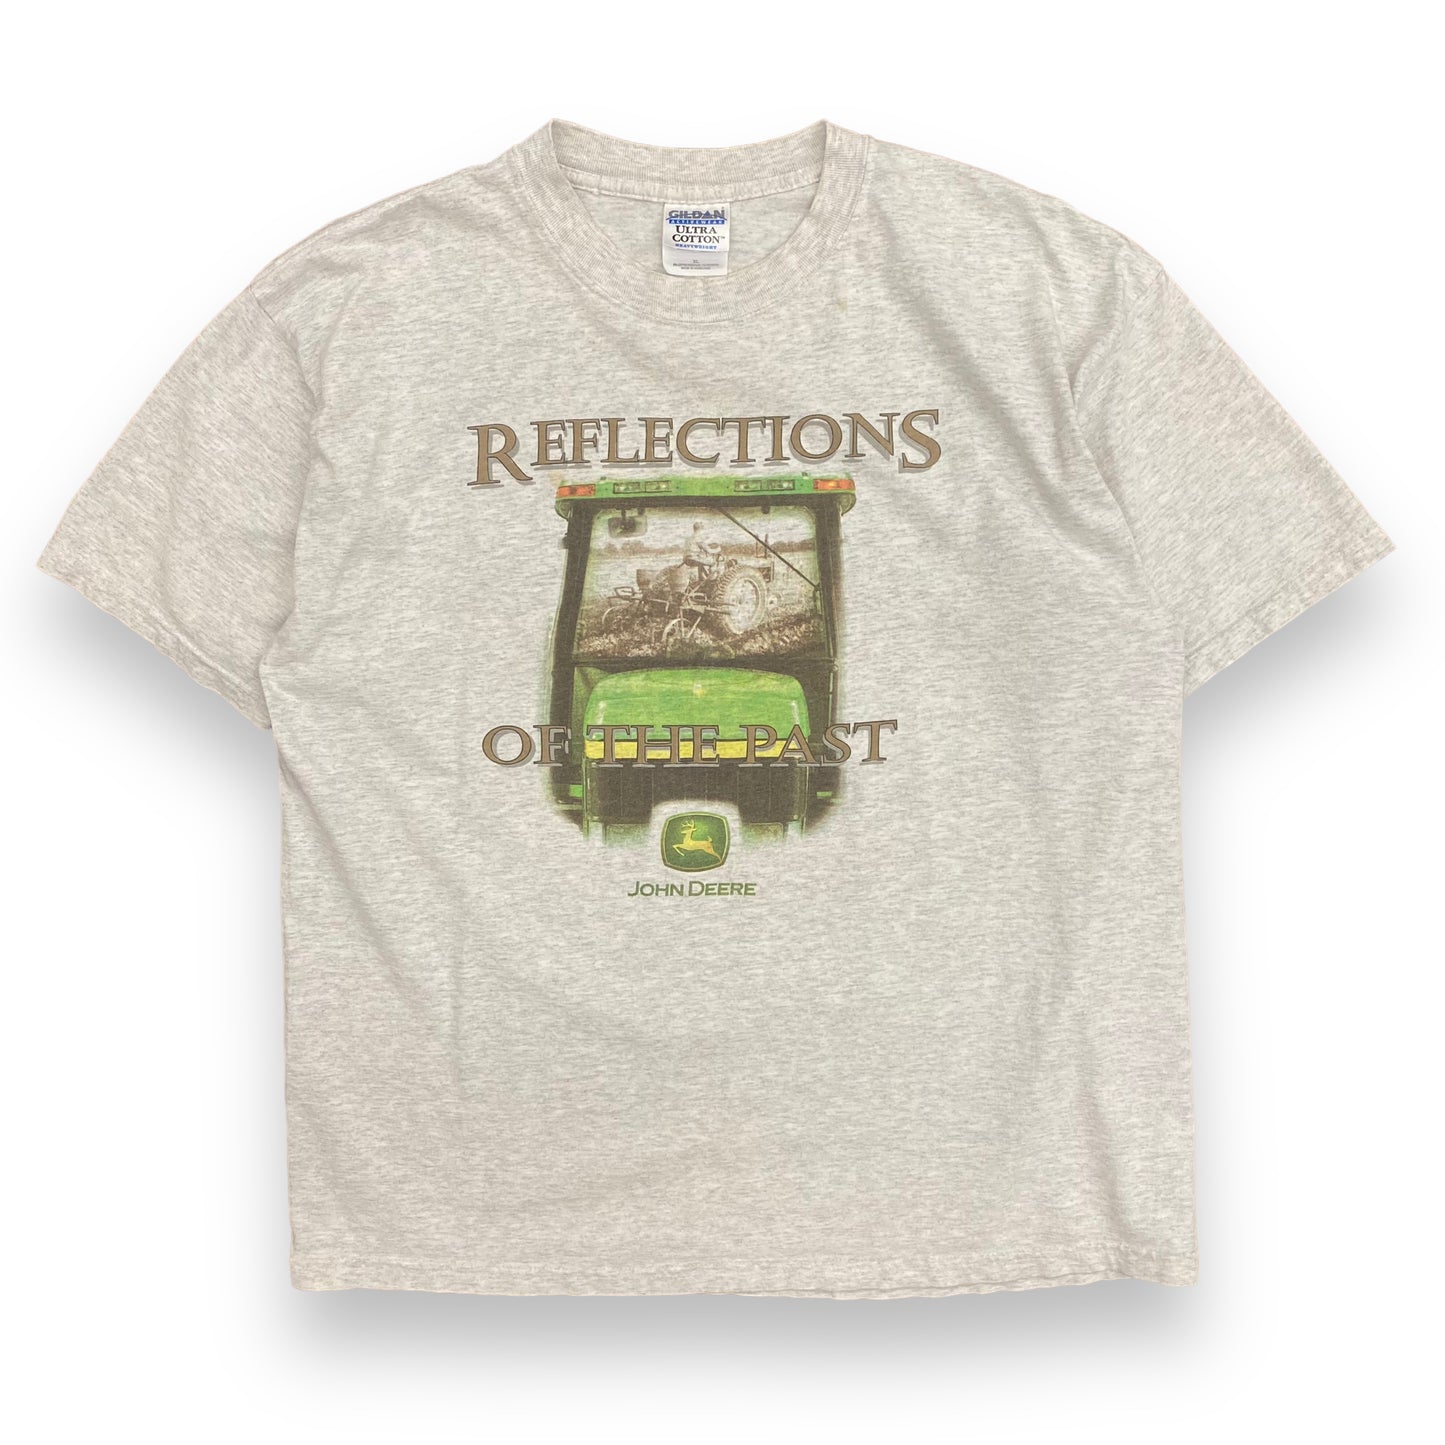 Early 2000s John Deer "Reflections of the Past" Tee - Size XL